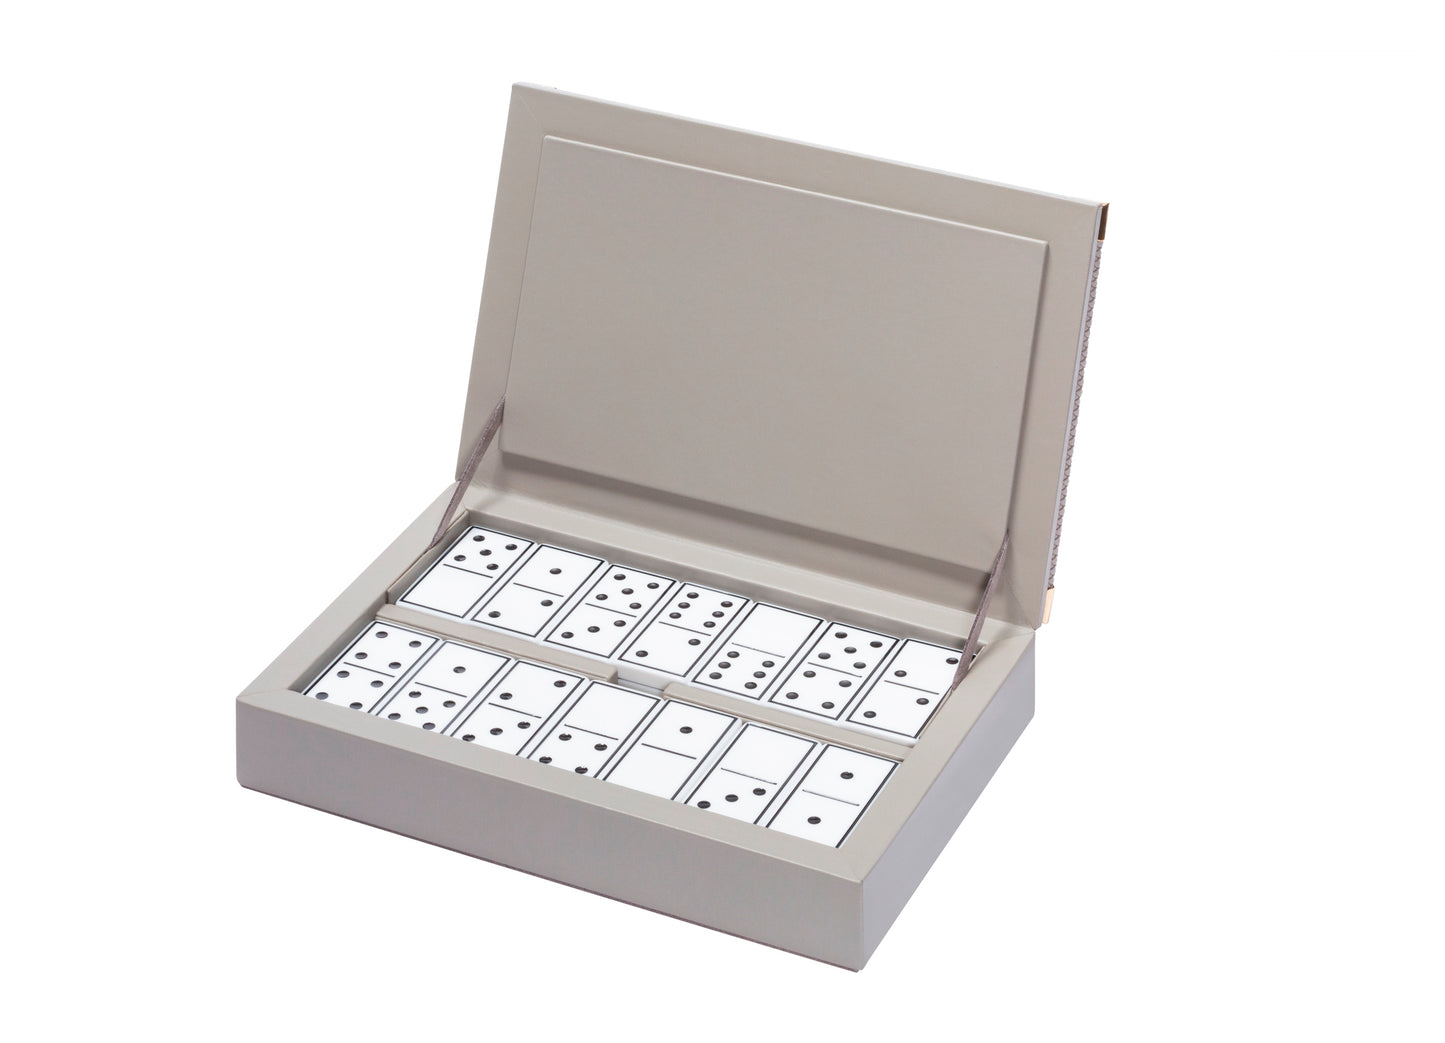 Riviere Thea Leather-Covered Domino Game Set With Braided Trim | Stylish Design with Braided Leather Trim and Metal Details | Set Equipped with Highly Resistant Glossy Plexiglass Domino Pieces | Choose Between Black or White Finish | Explore a Range of Luxury Domino Game Sets at 2Jour Concierge, #1 luxury high-end gift & lifestyle shop